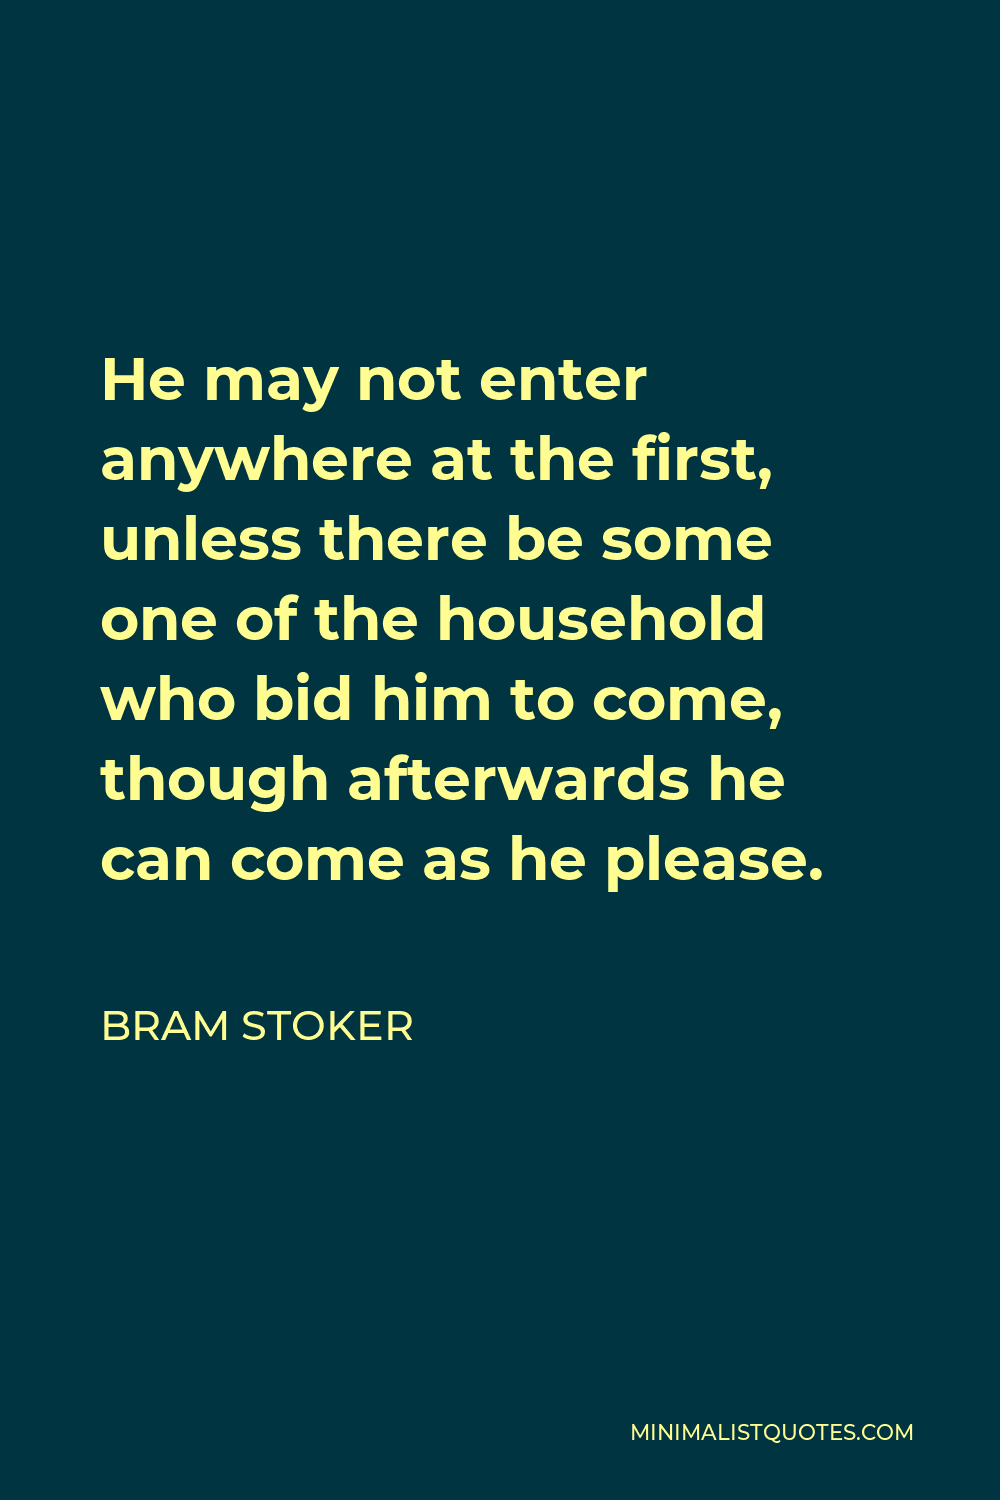 Bram Stoker Quote - He may not enter anywhere at the first, unless there be some one of the household who bid him to come, though afterwards he can come as he please.